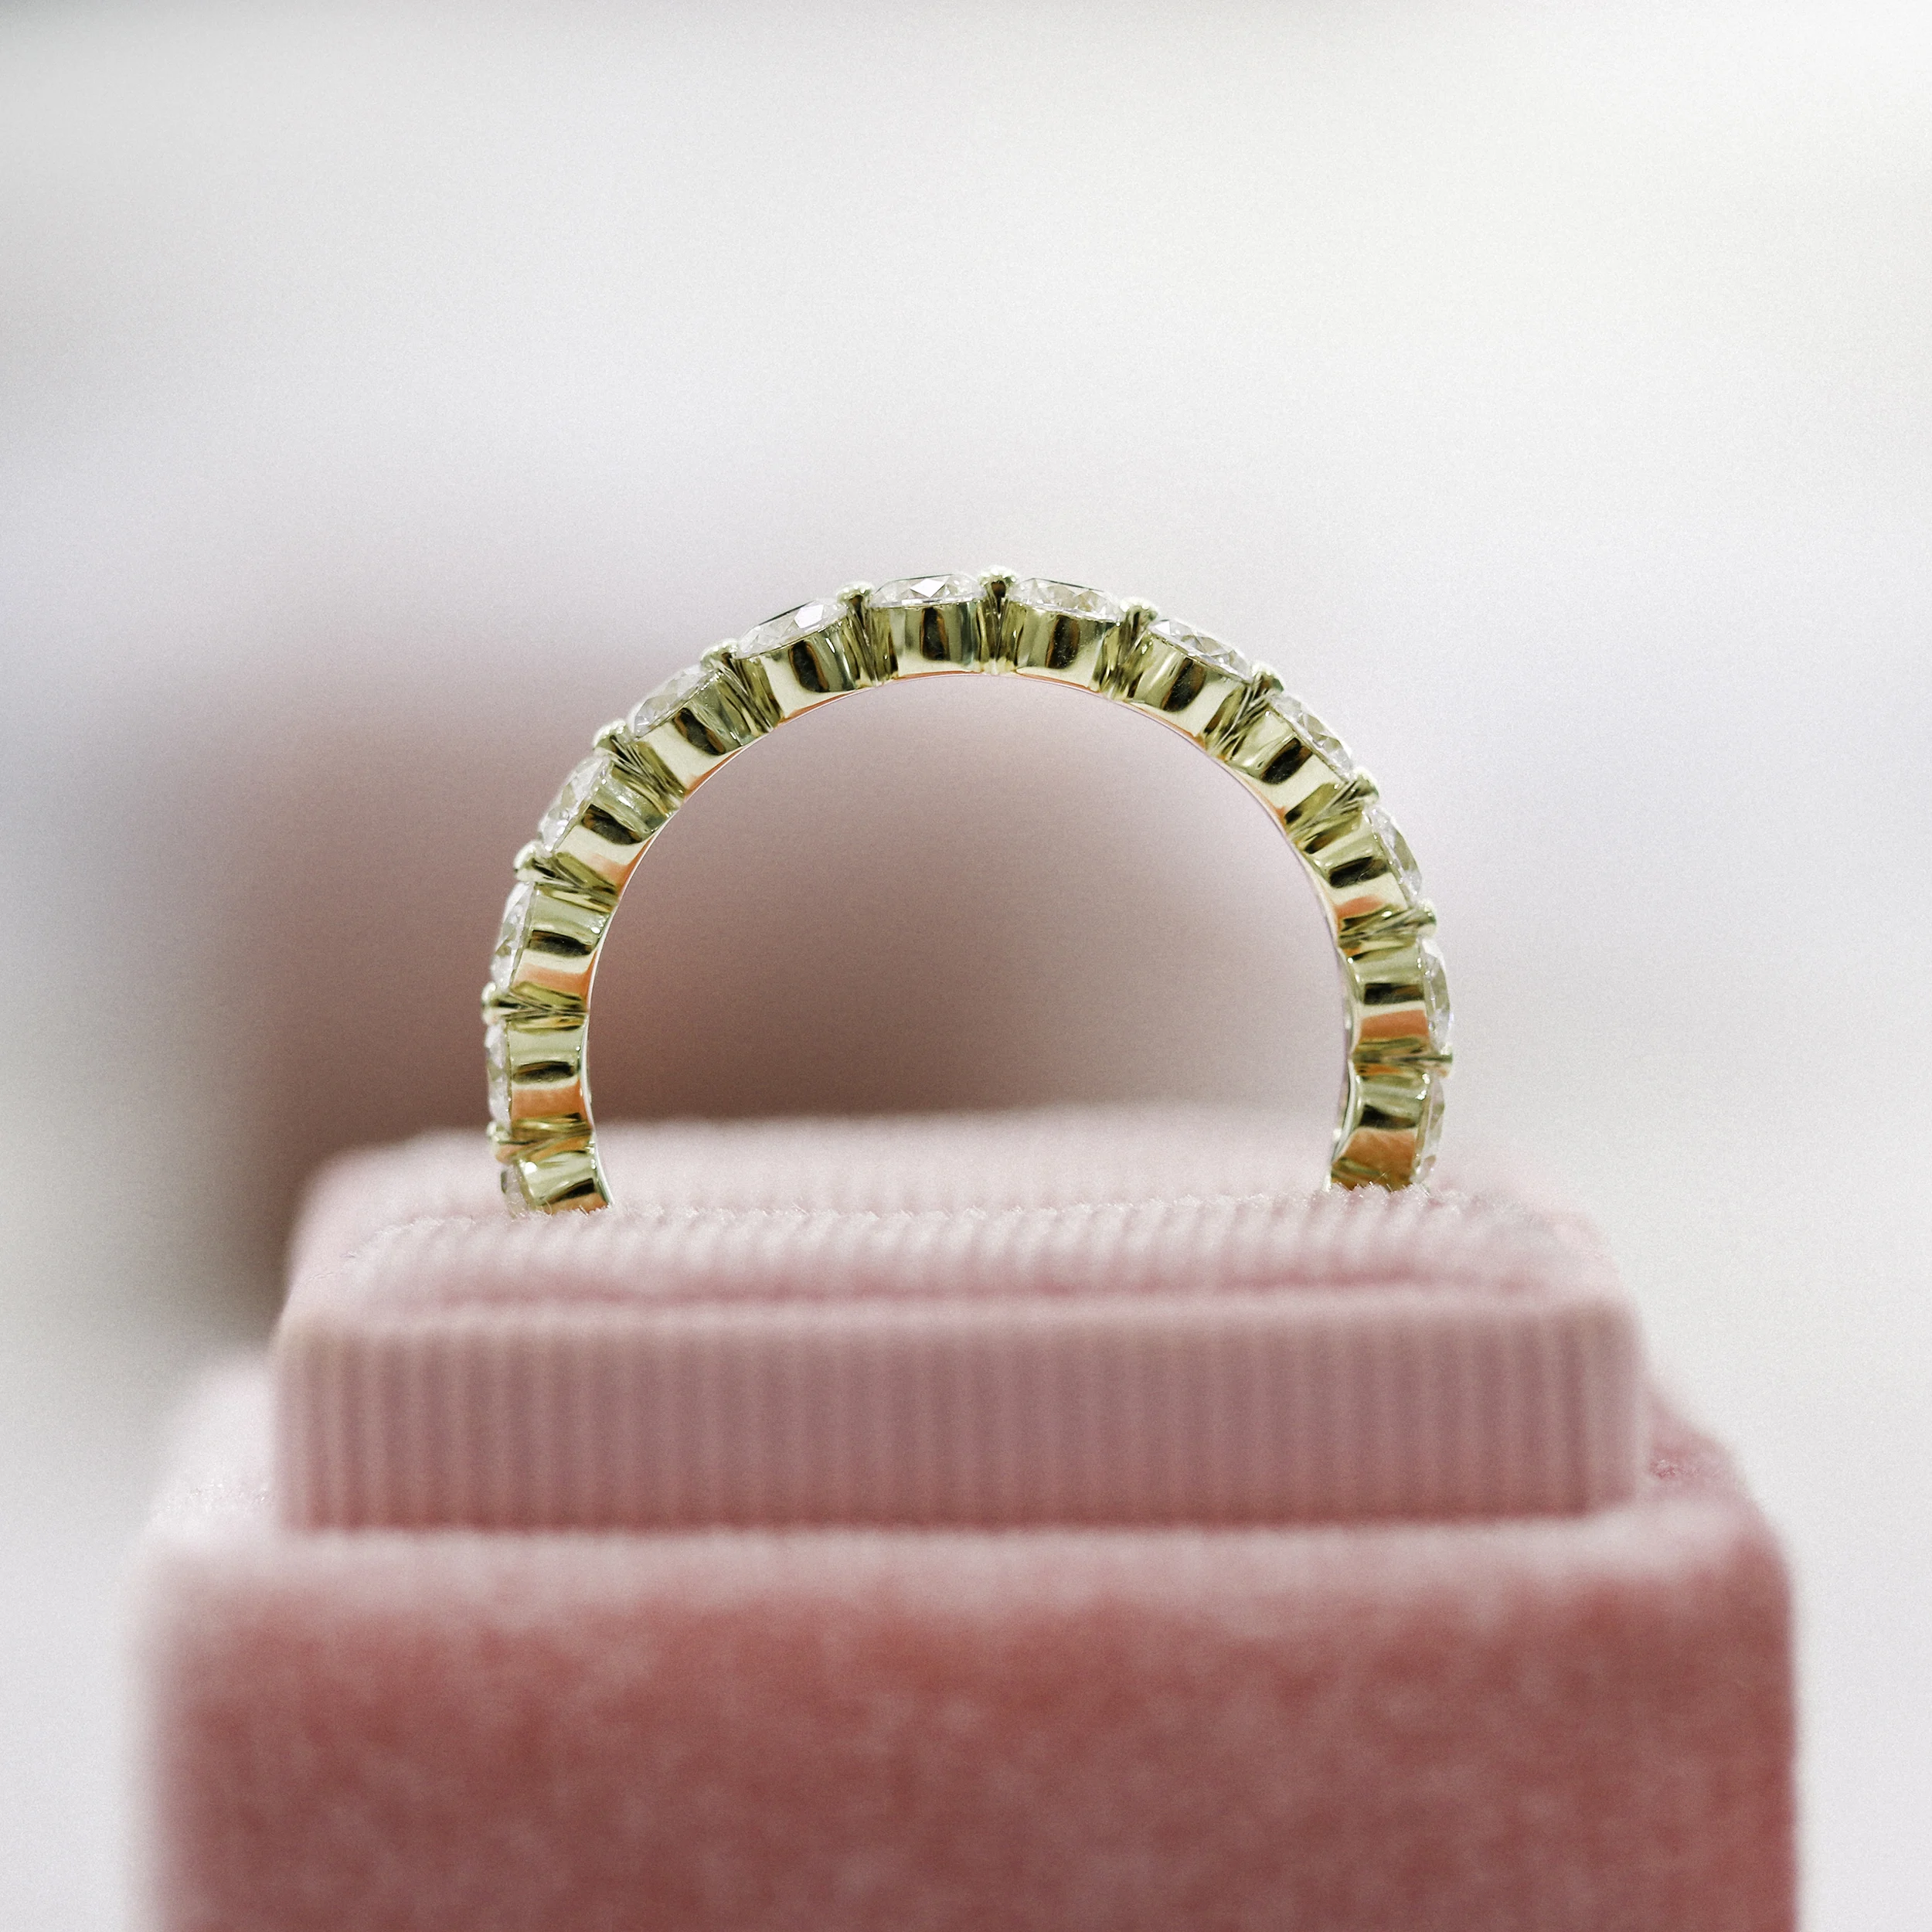 18k Yellow Gold 2ctw Shared Prong Round Diamond Eternity Band in 18k Yellow Gold featuring Hand Selected 2.0 ct Round Man Made Diamonds (Profile View)